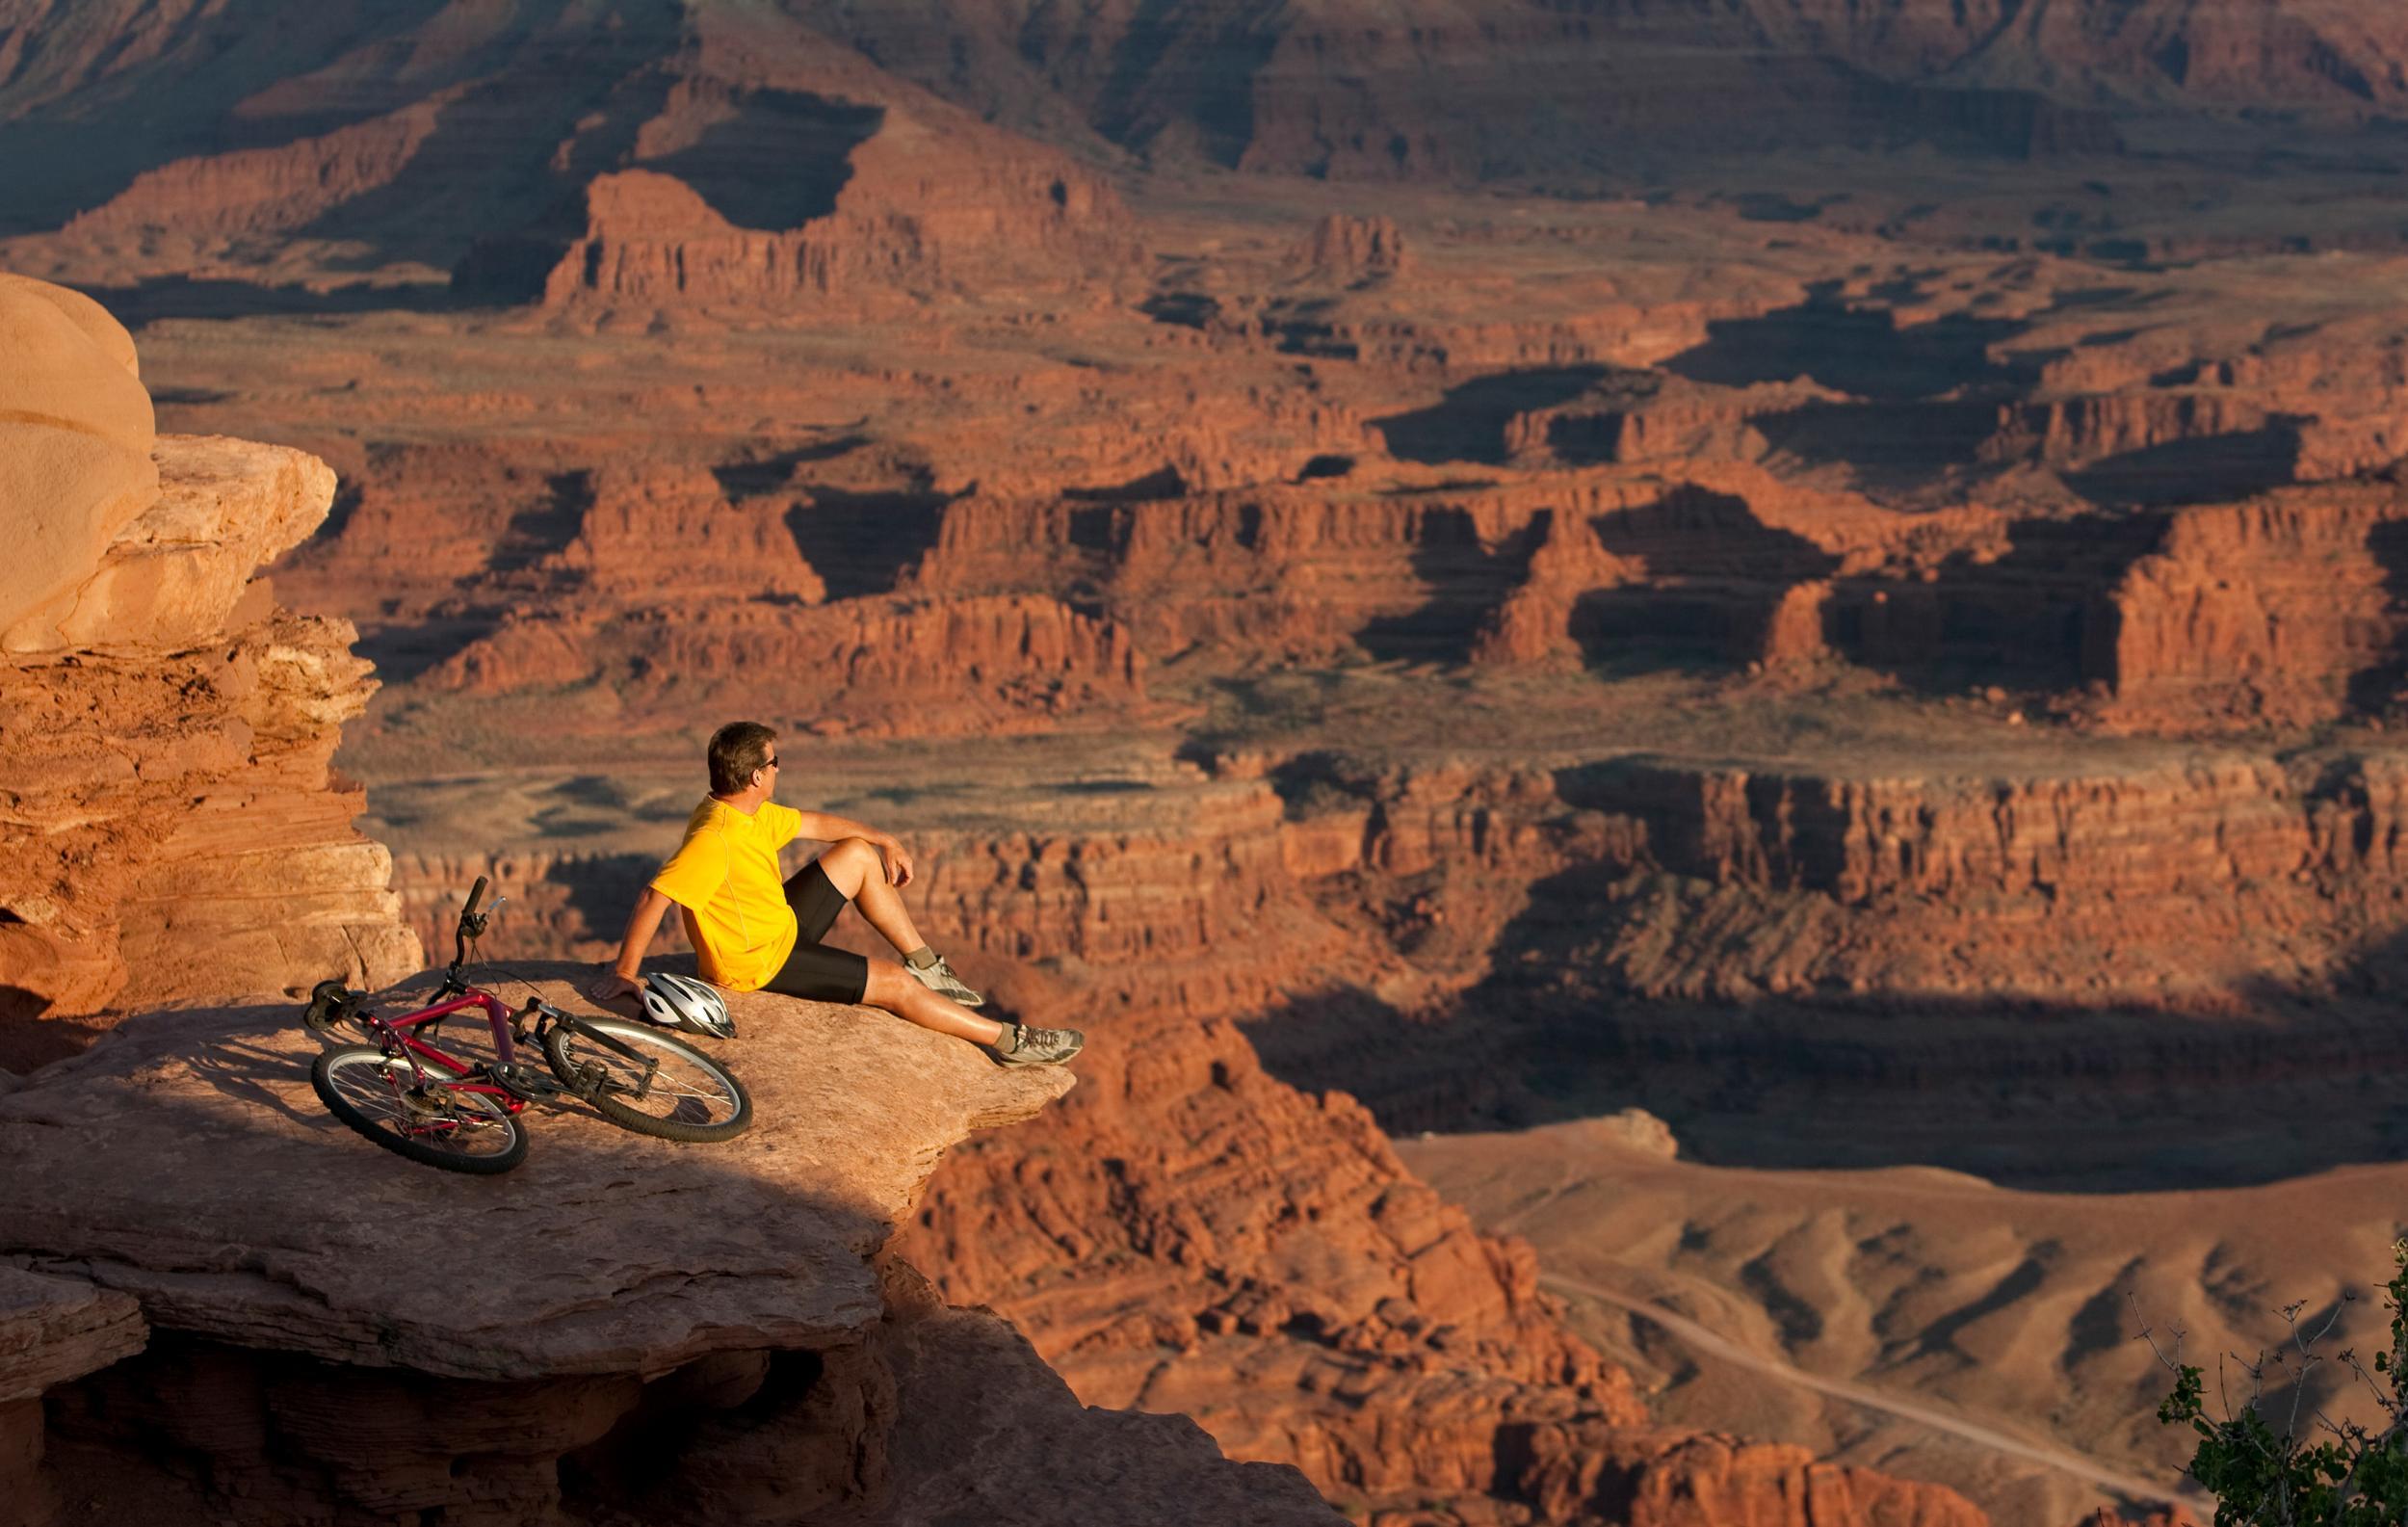 Canyonlands is an adventure playground, great for off-roading, hiking and biking